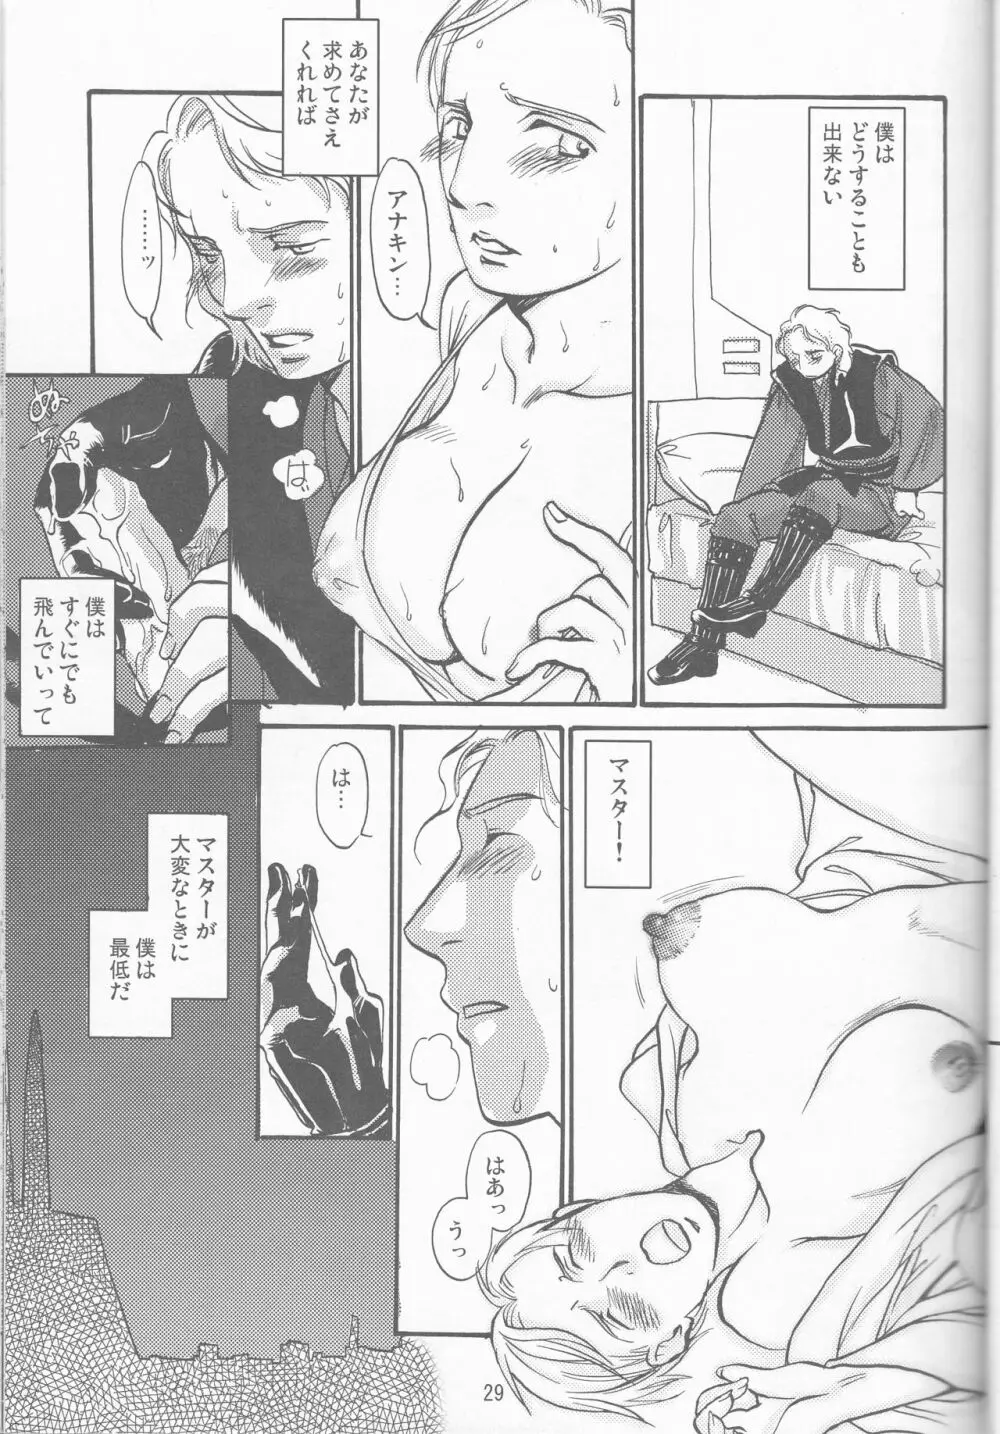 Obi Female Transformation Book 1 of 2 - page29